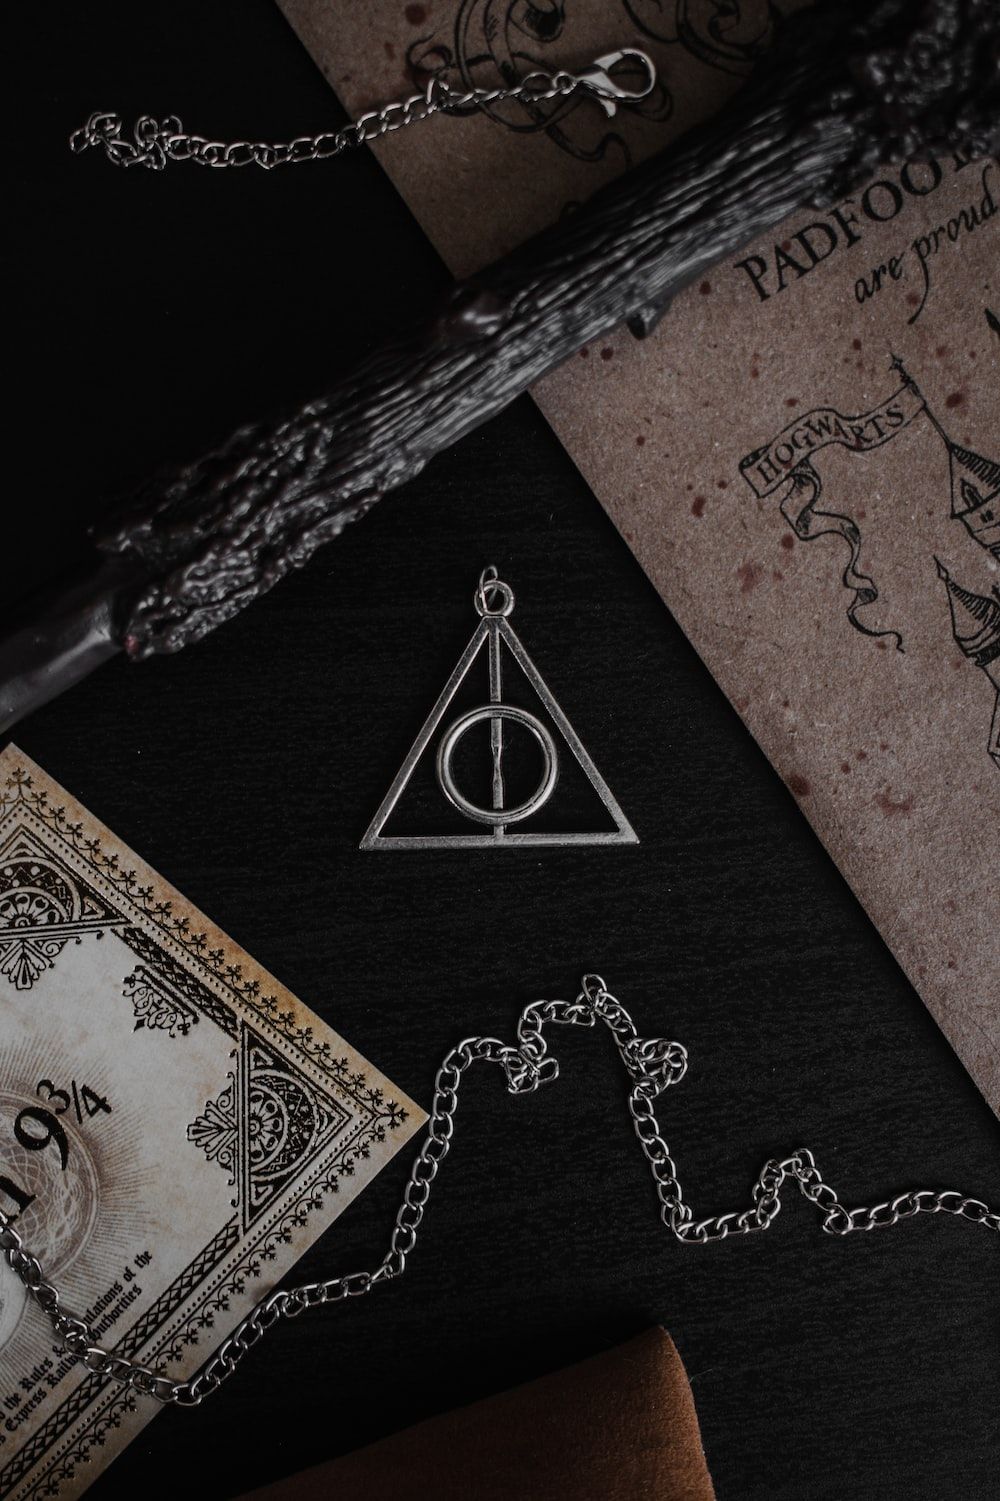 Harry Potter Wand Picture. Download Free Image